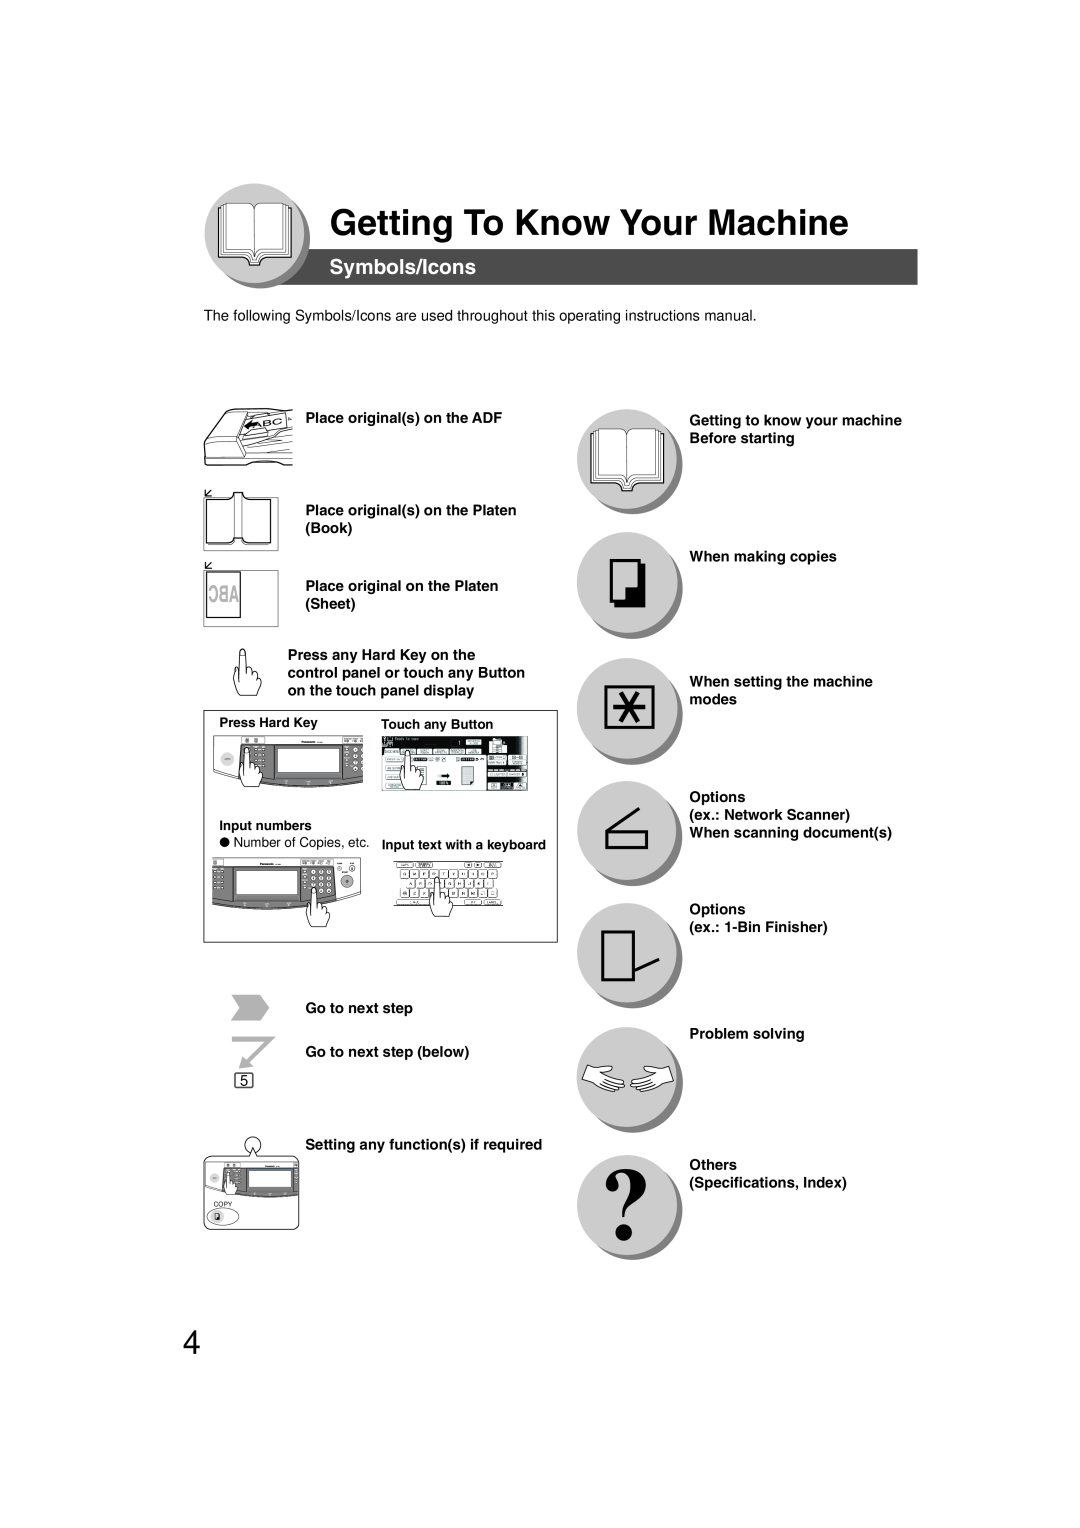 Panasonic 4520 Symbols/Icons, Getting To Know Your Machine, Place originals on the ADF Place originals on the Platen Book 